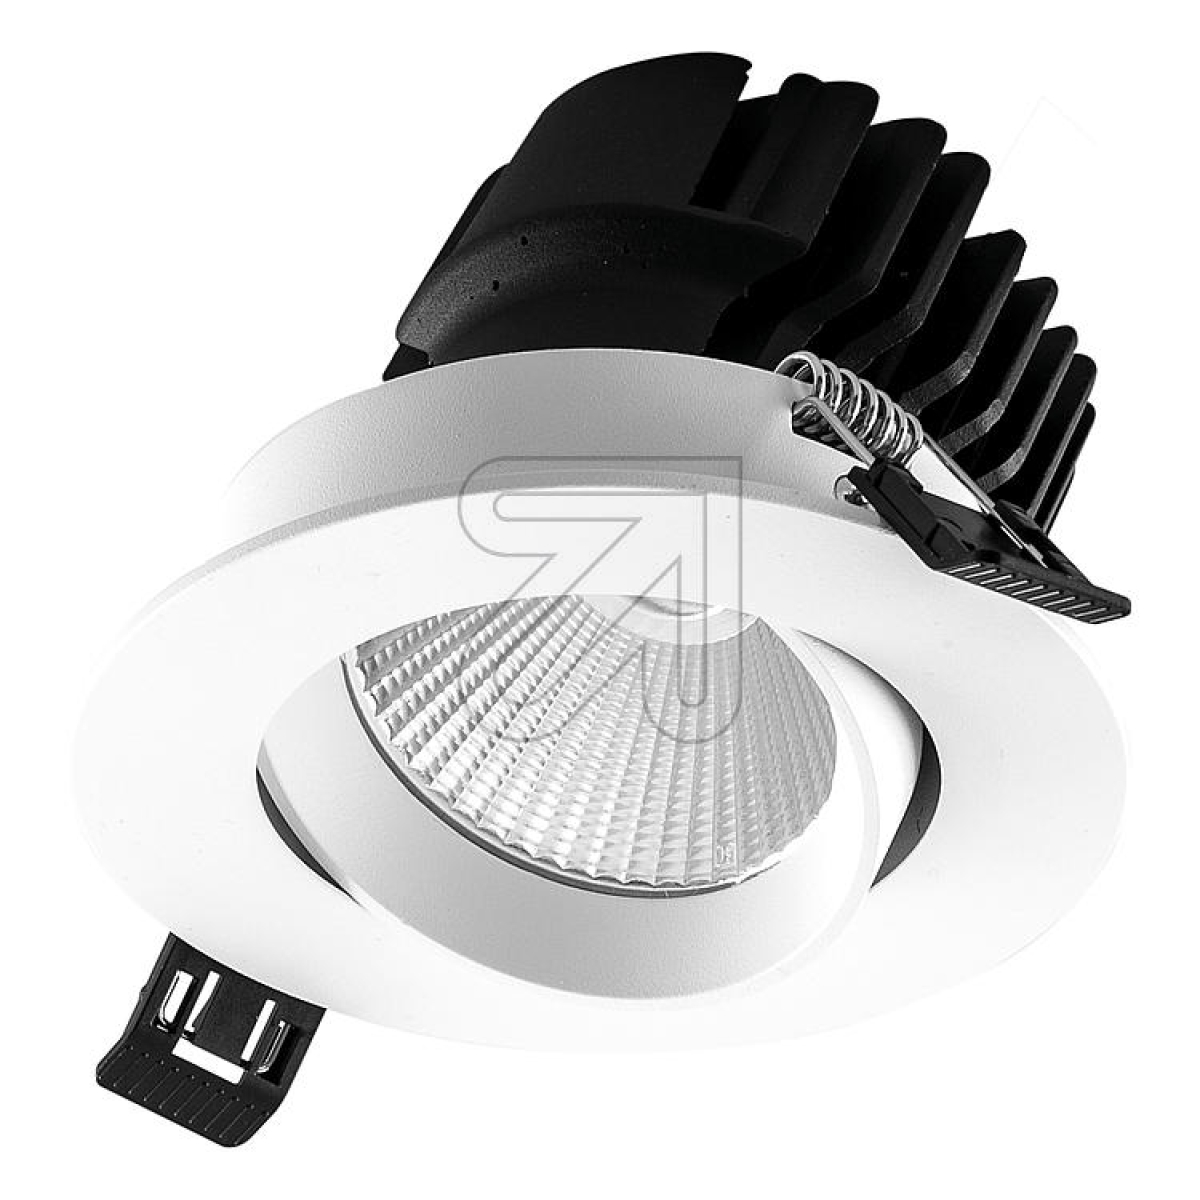 EVNLED recessed spotlight round white 3000K 13W PC20150102 rotatable/swivellingArticle-No: 670100